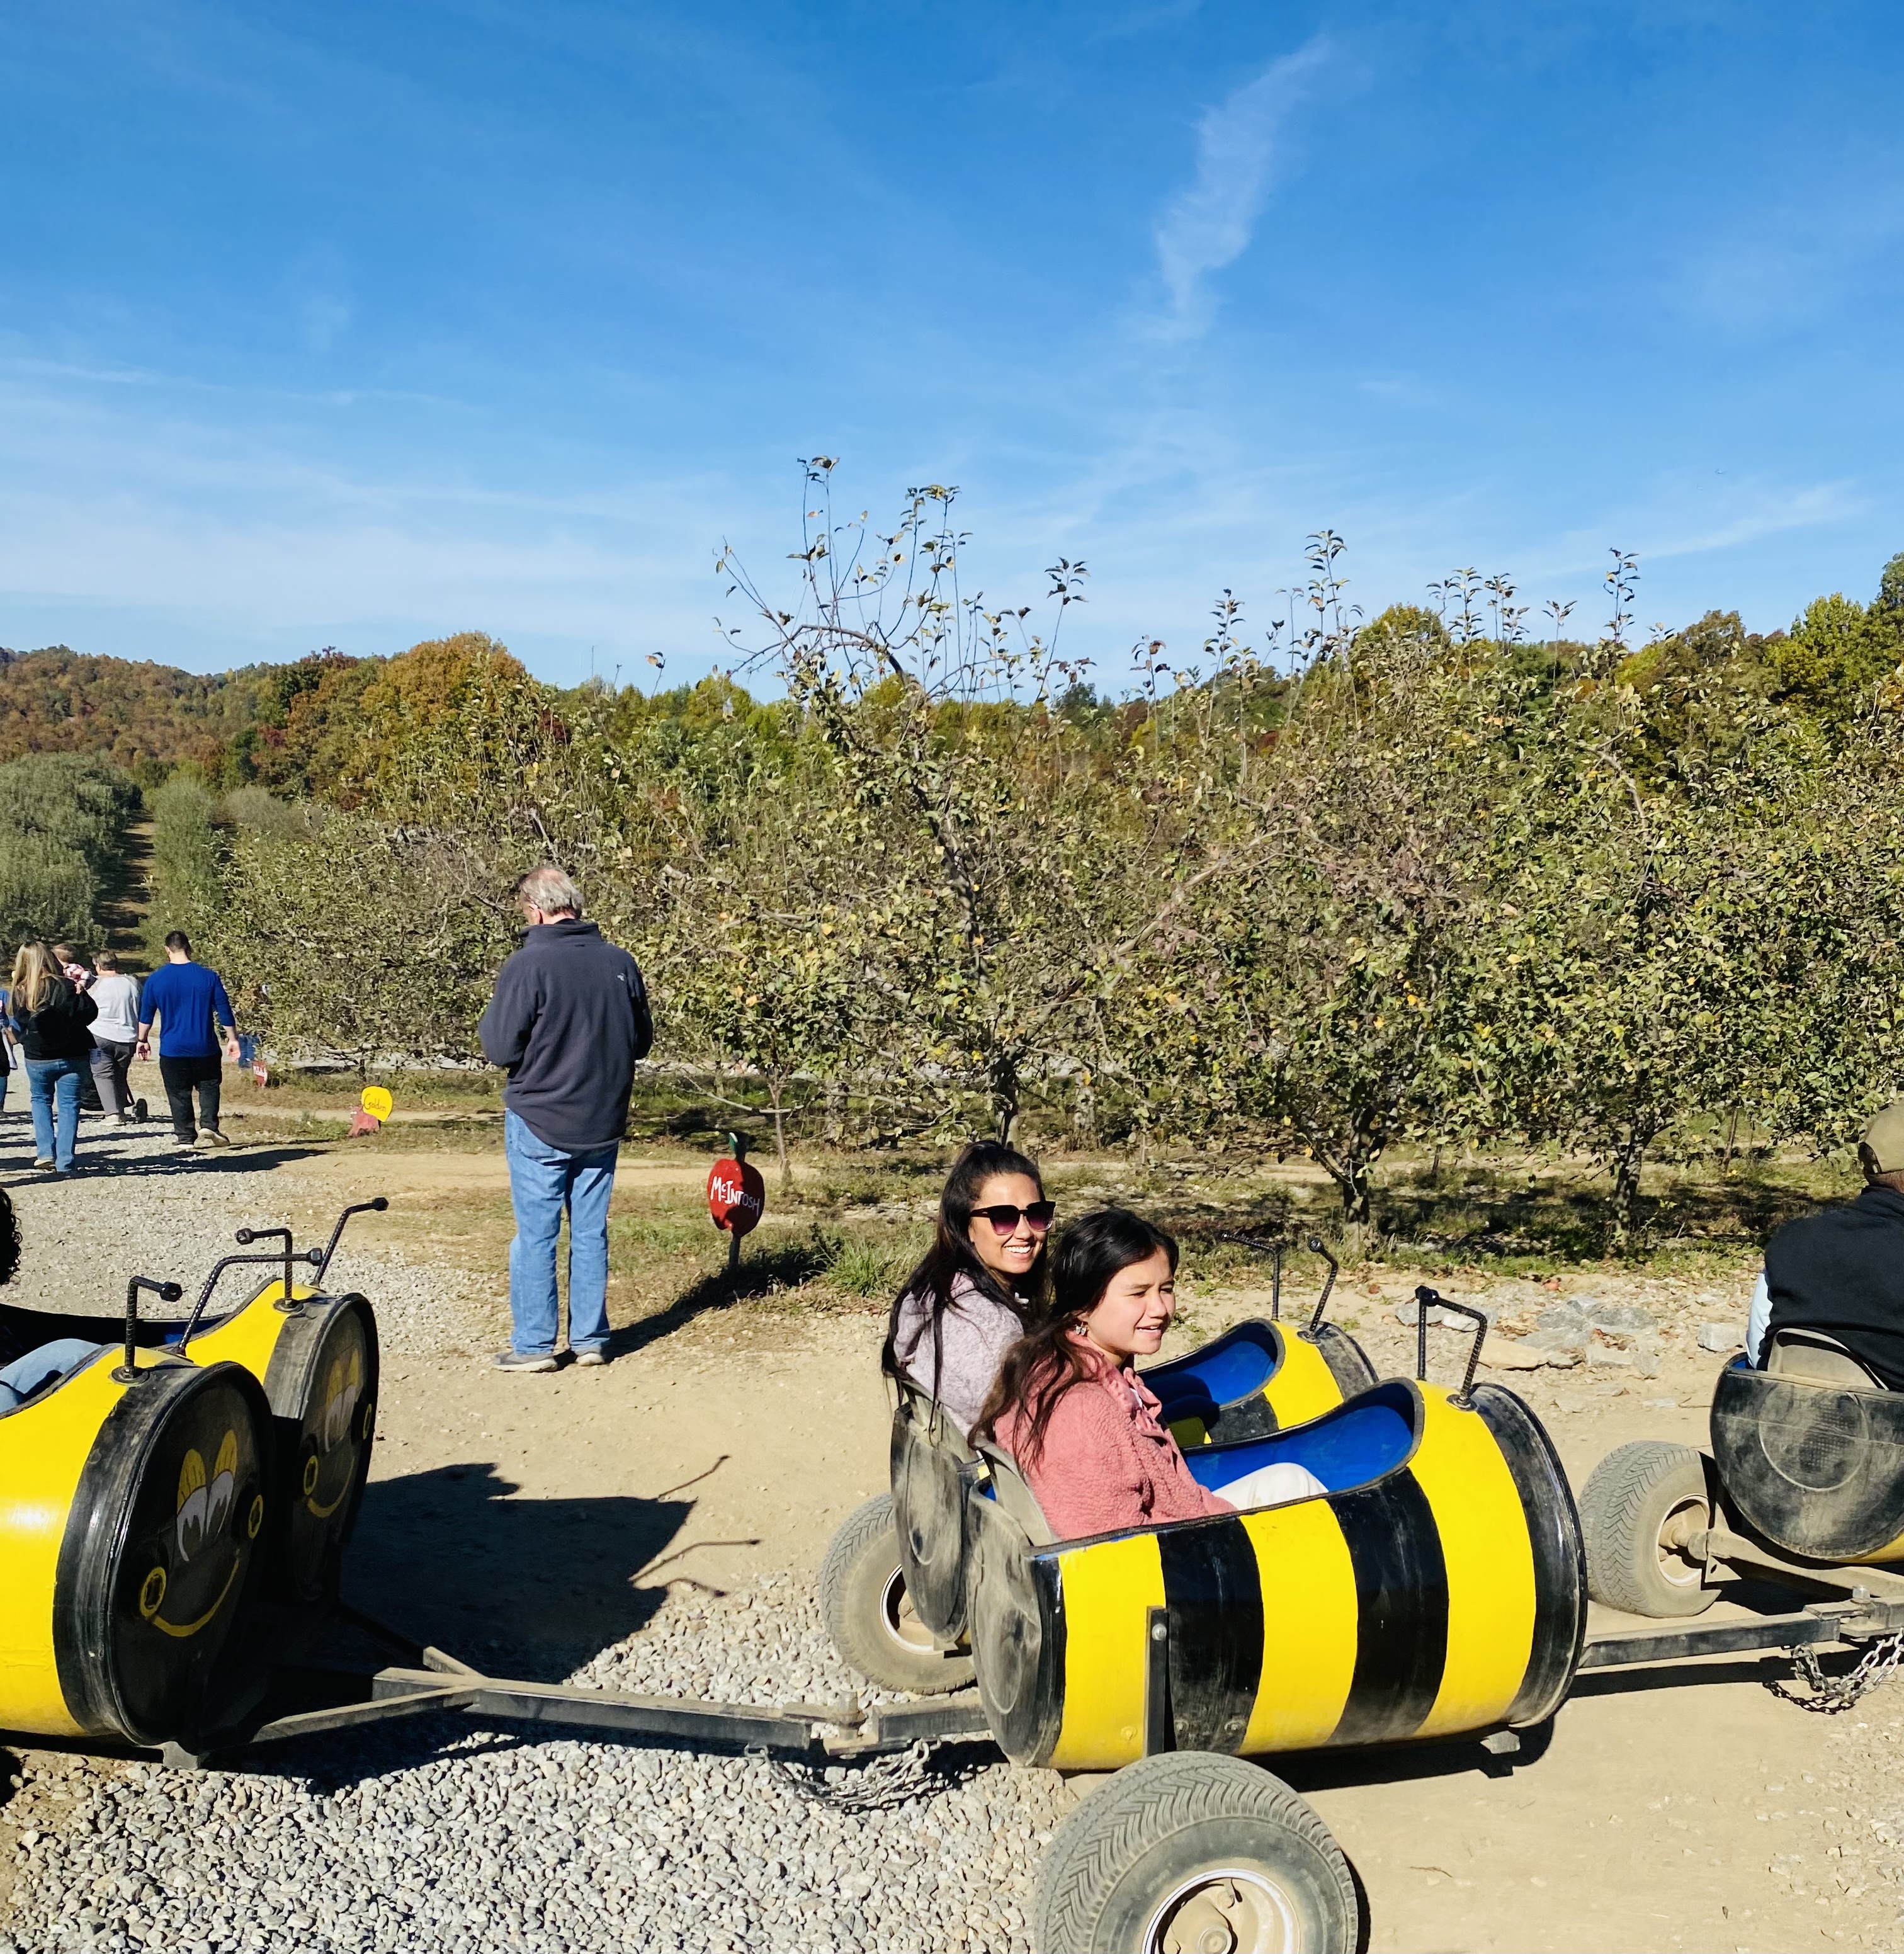 Things to do at sky top orchard in flat nc, ride the bee train.